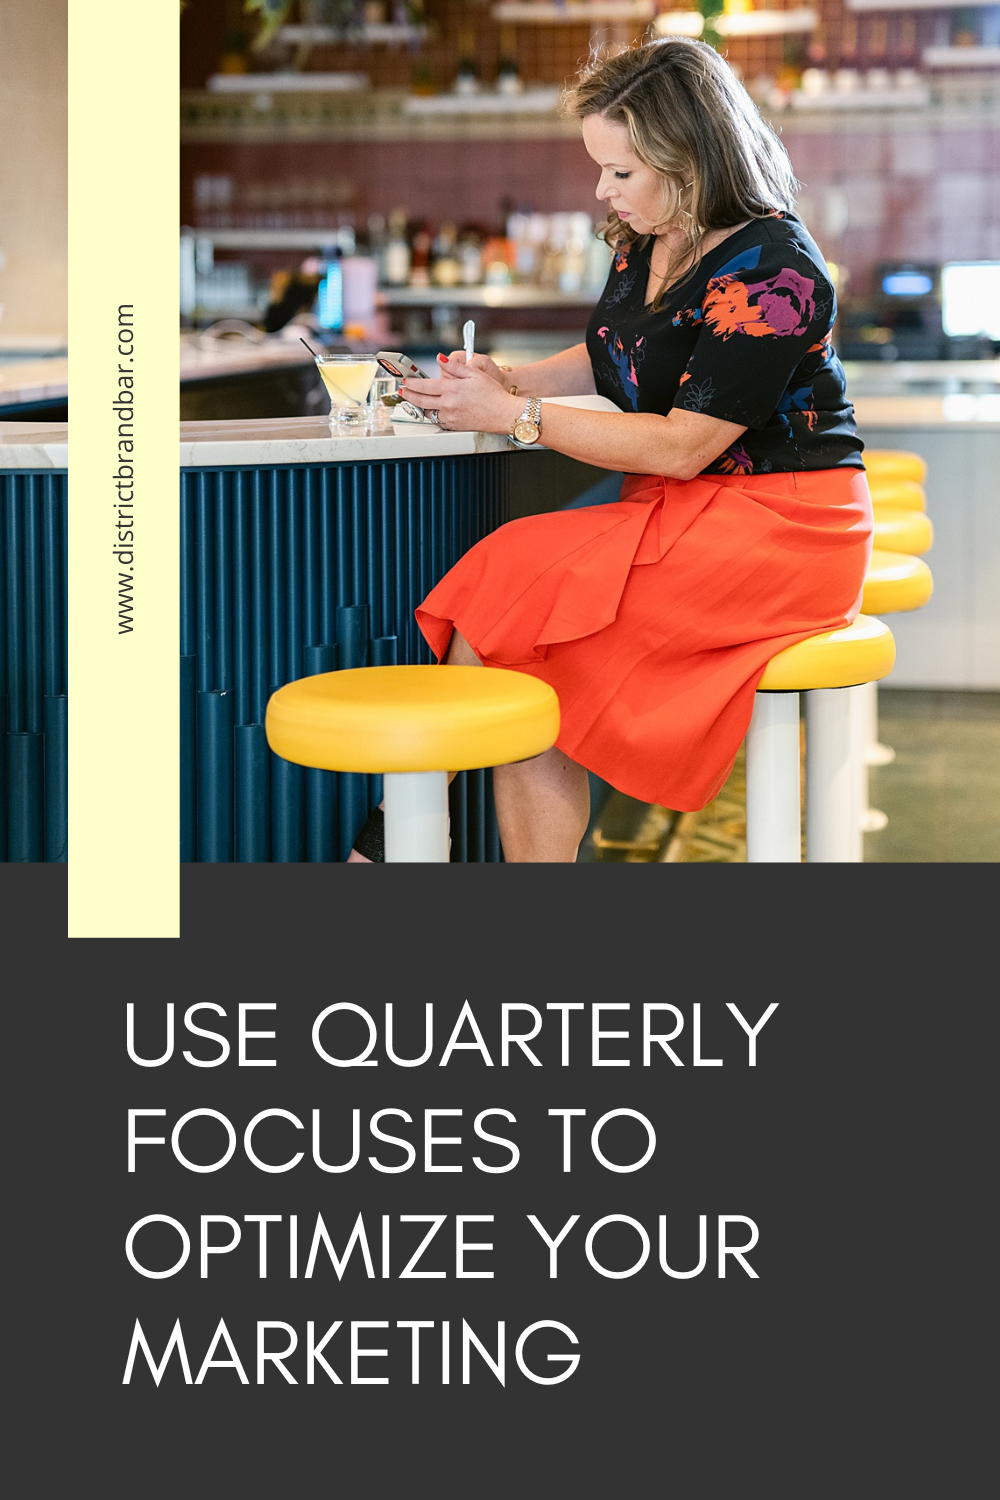 How Quarterly Focuses Turns Followers into Clients